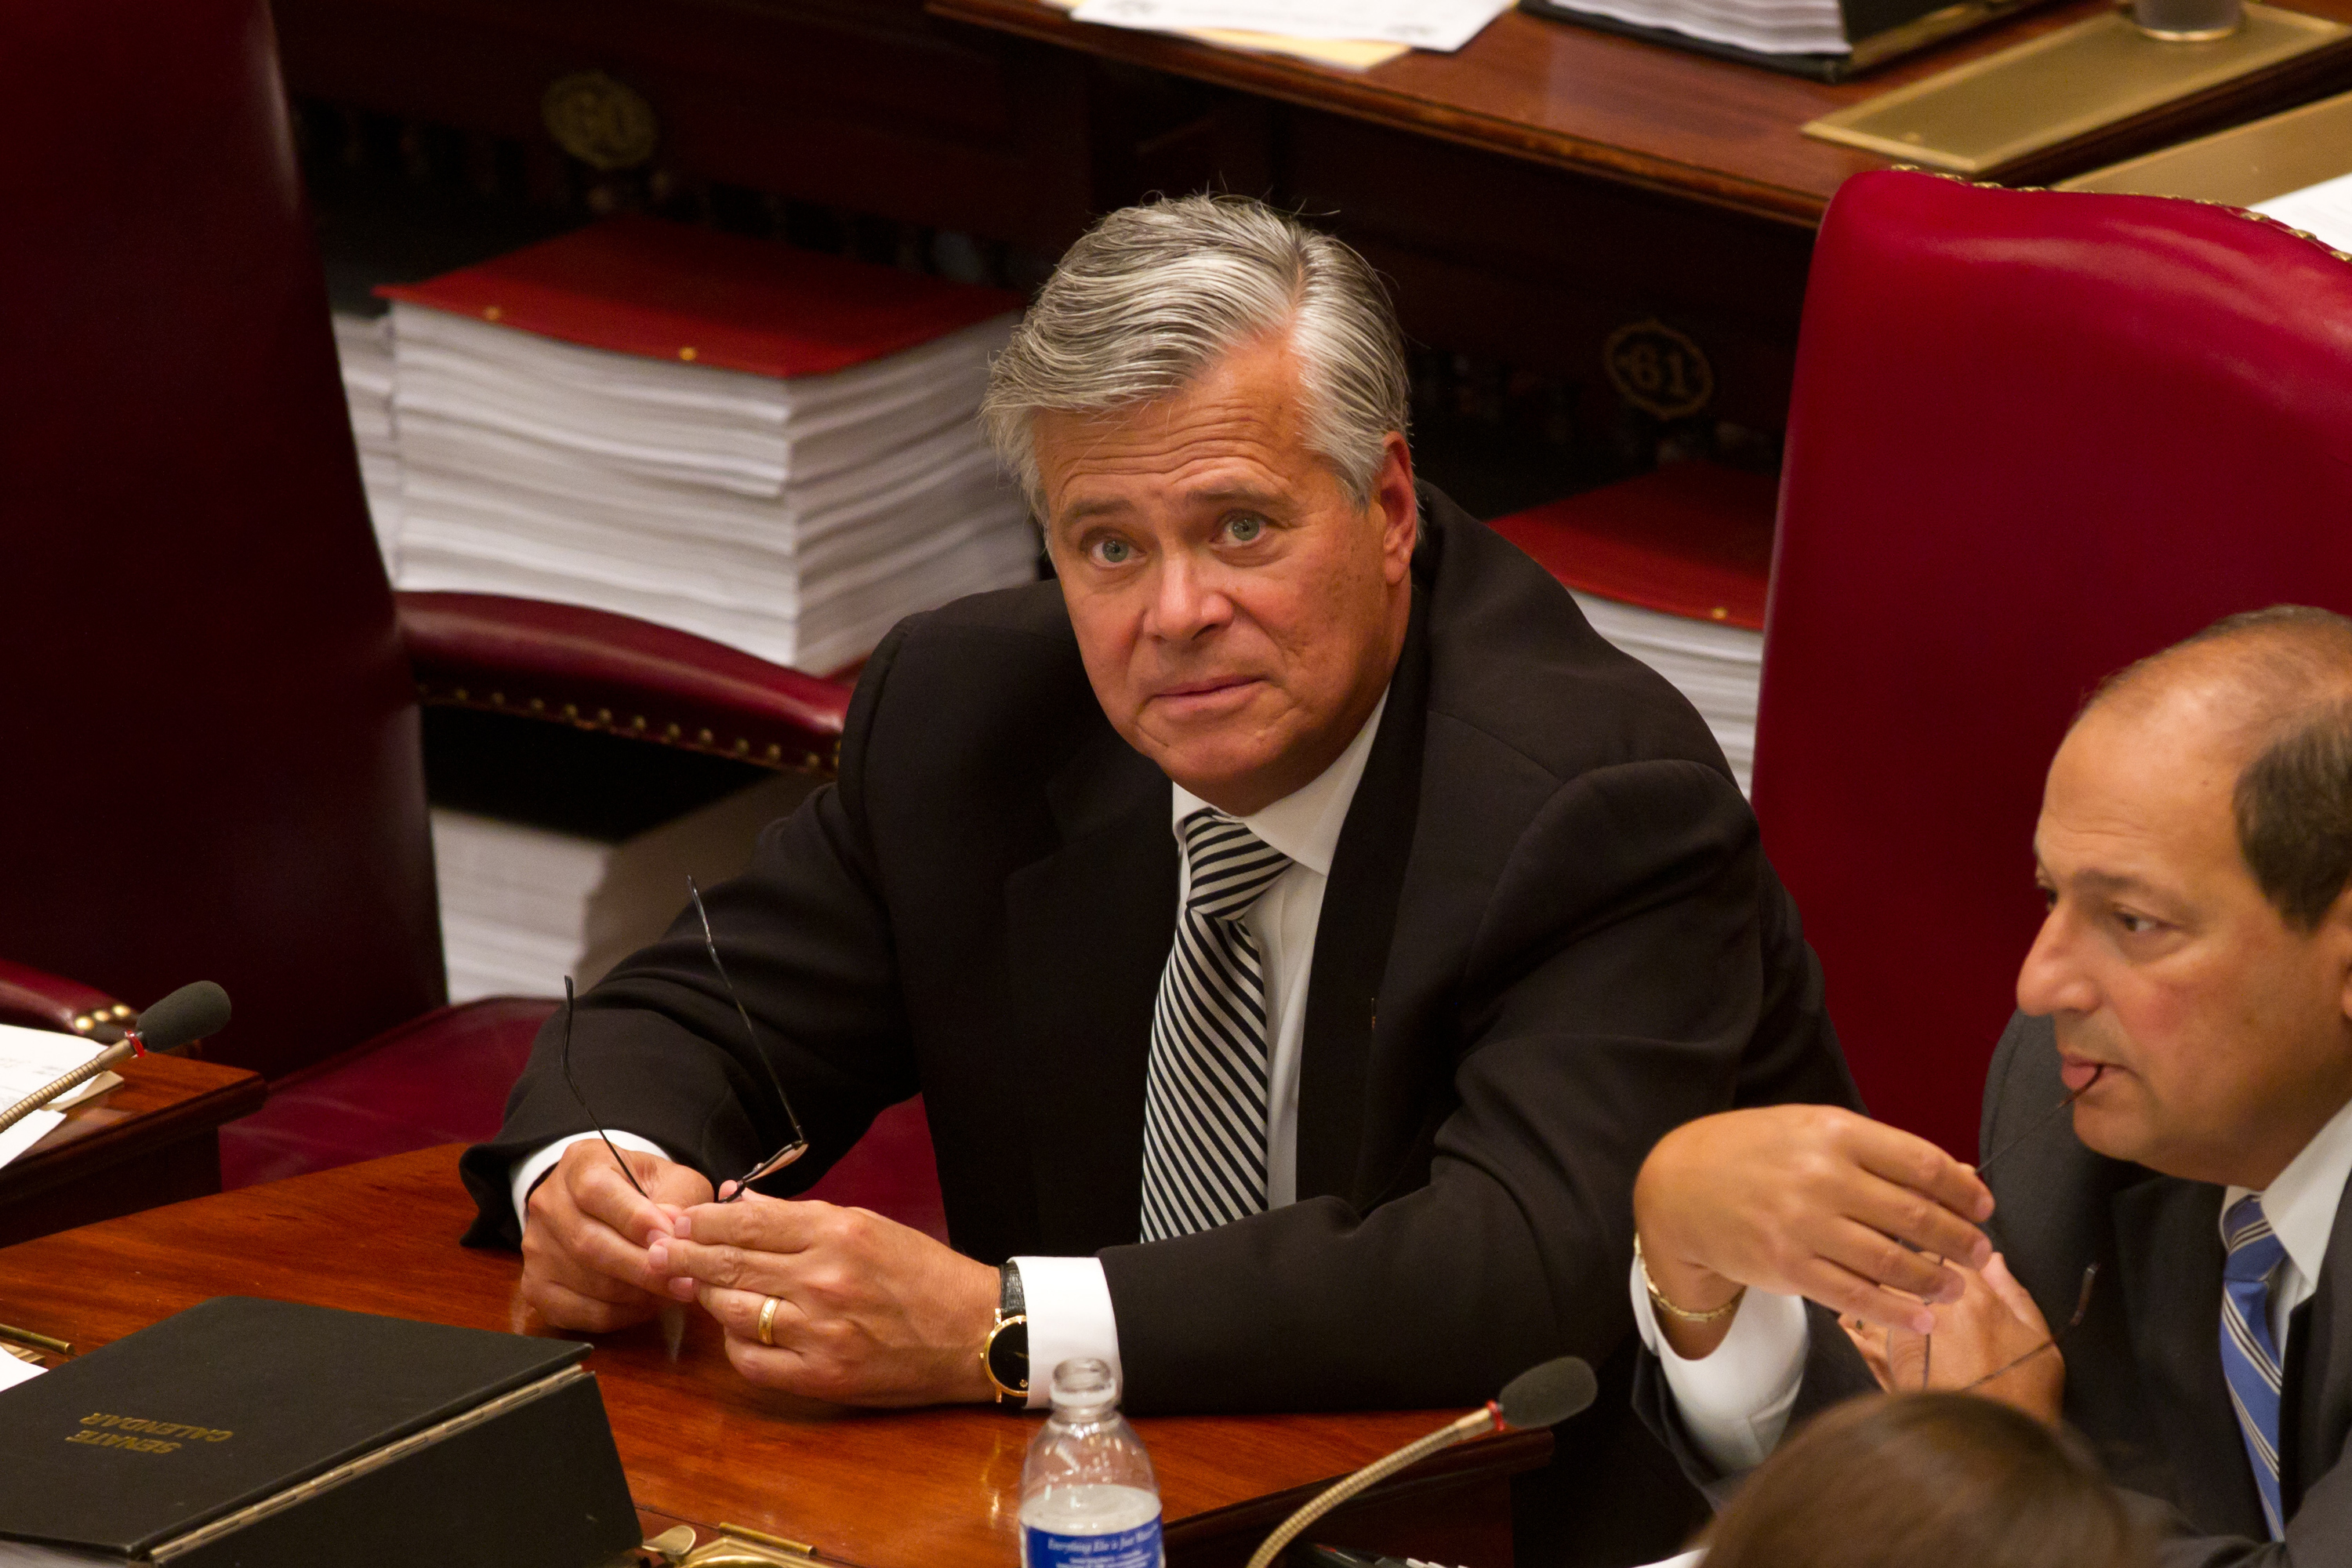 New York Senate Majority Leader Sen. Dean Skelos (R-District 9) (C) talks with colleagues in the Senate chamber on June 16, 2011 in Albany, New York.  (Photo: Matthew Cavanaugh/Getty Images)